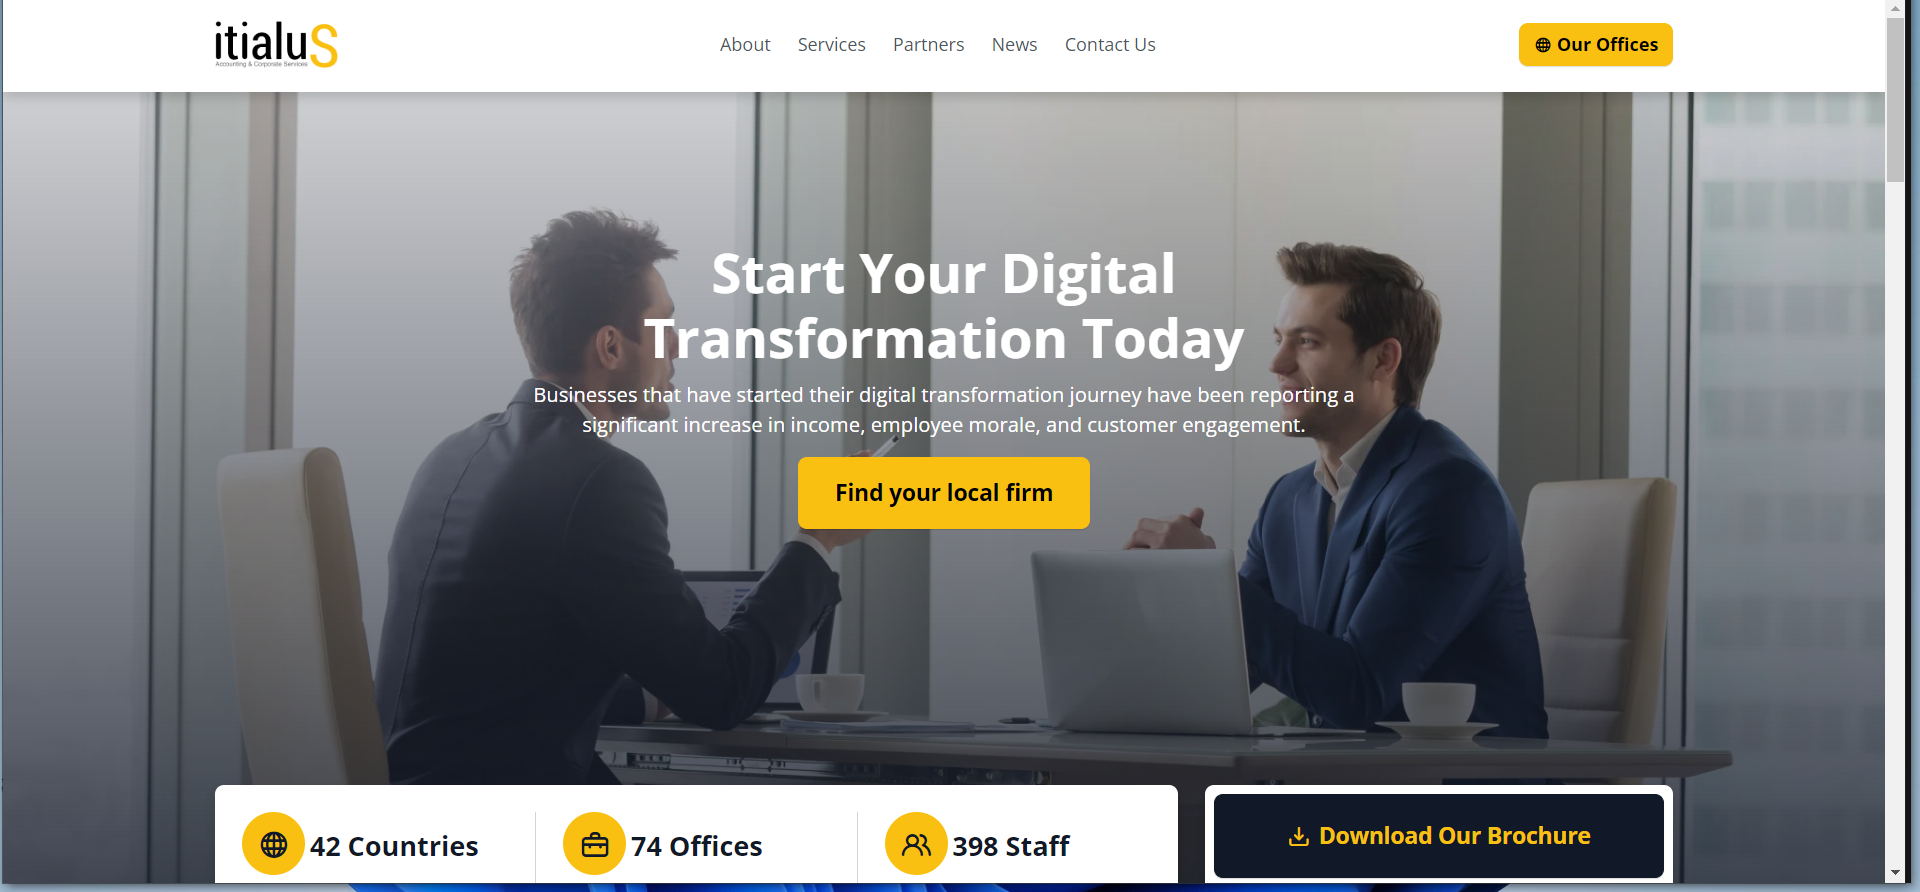 Our New Website is Adopting the Digital Transformation